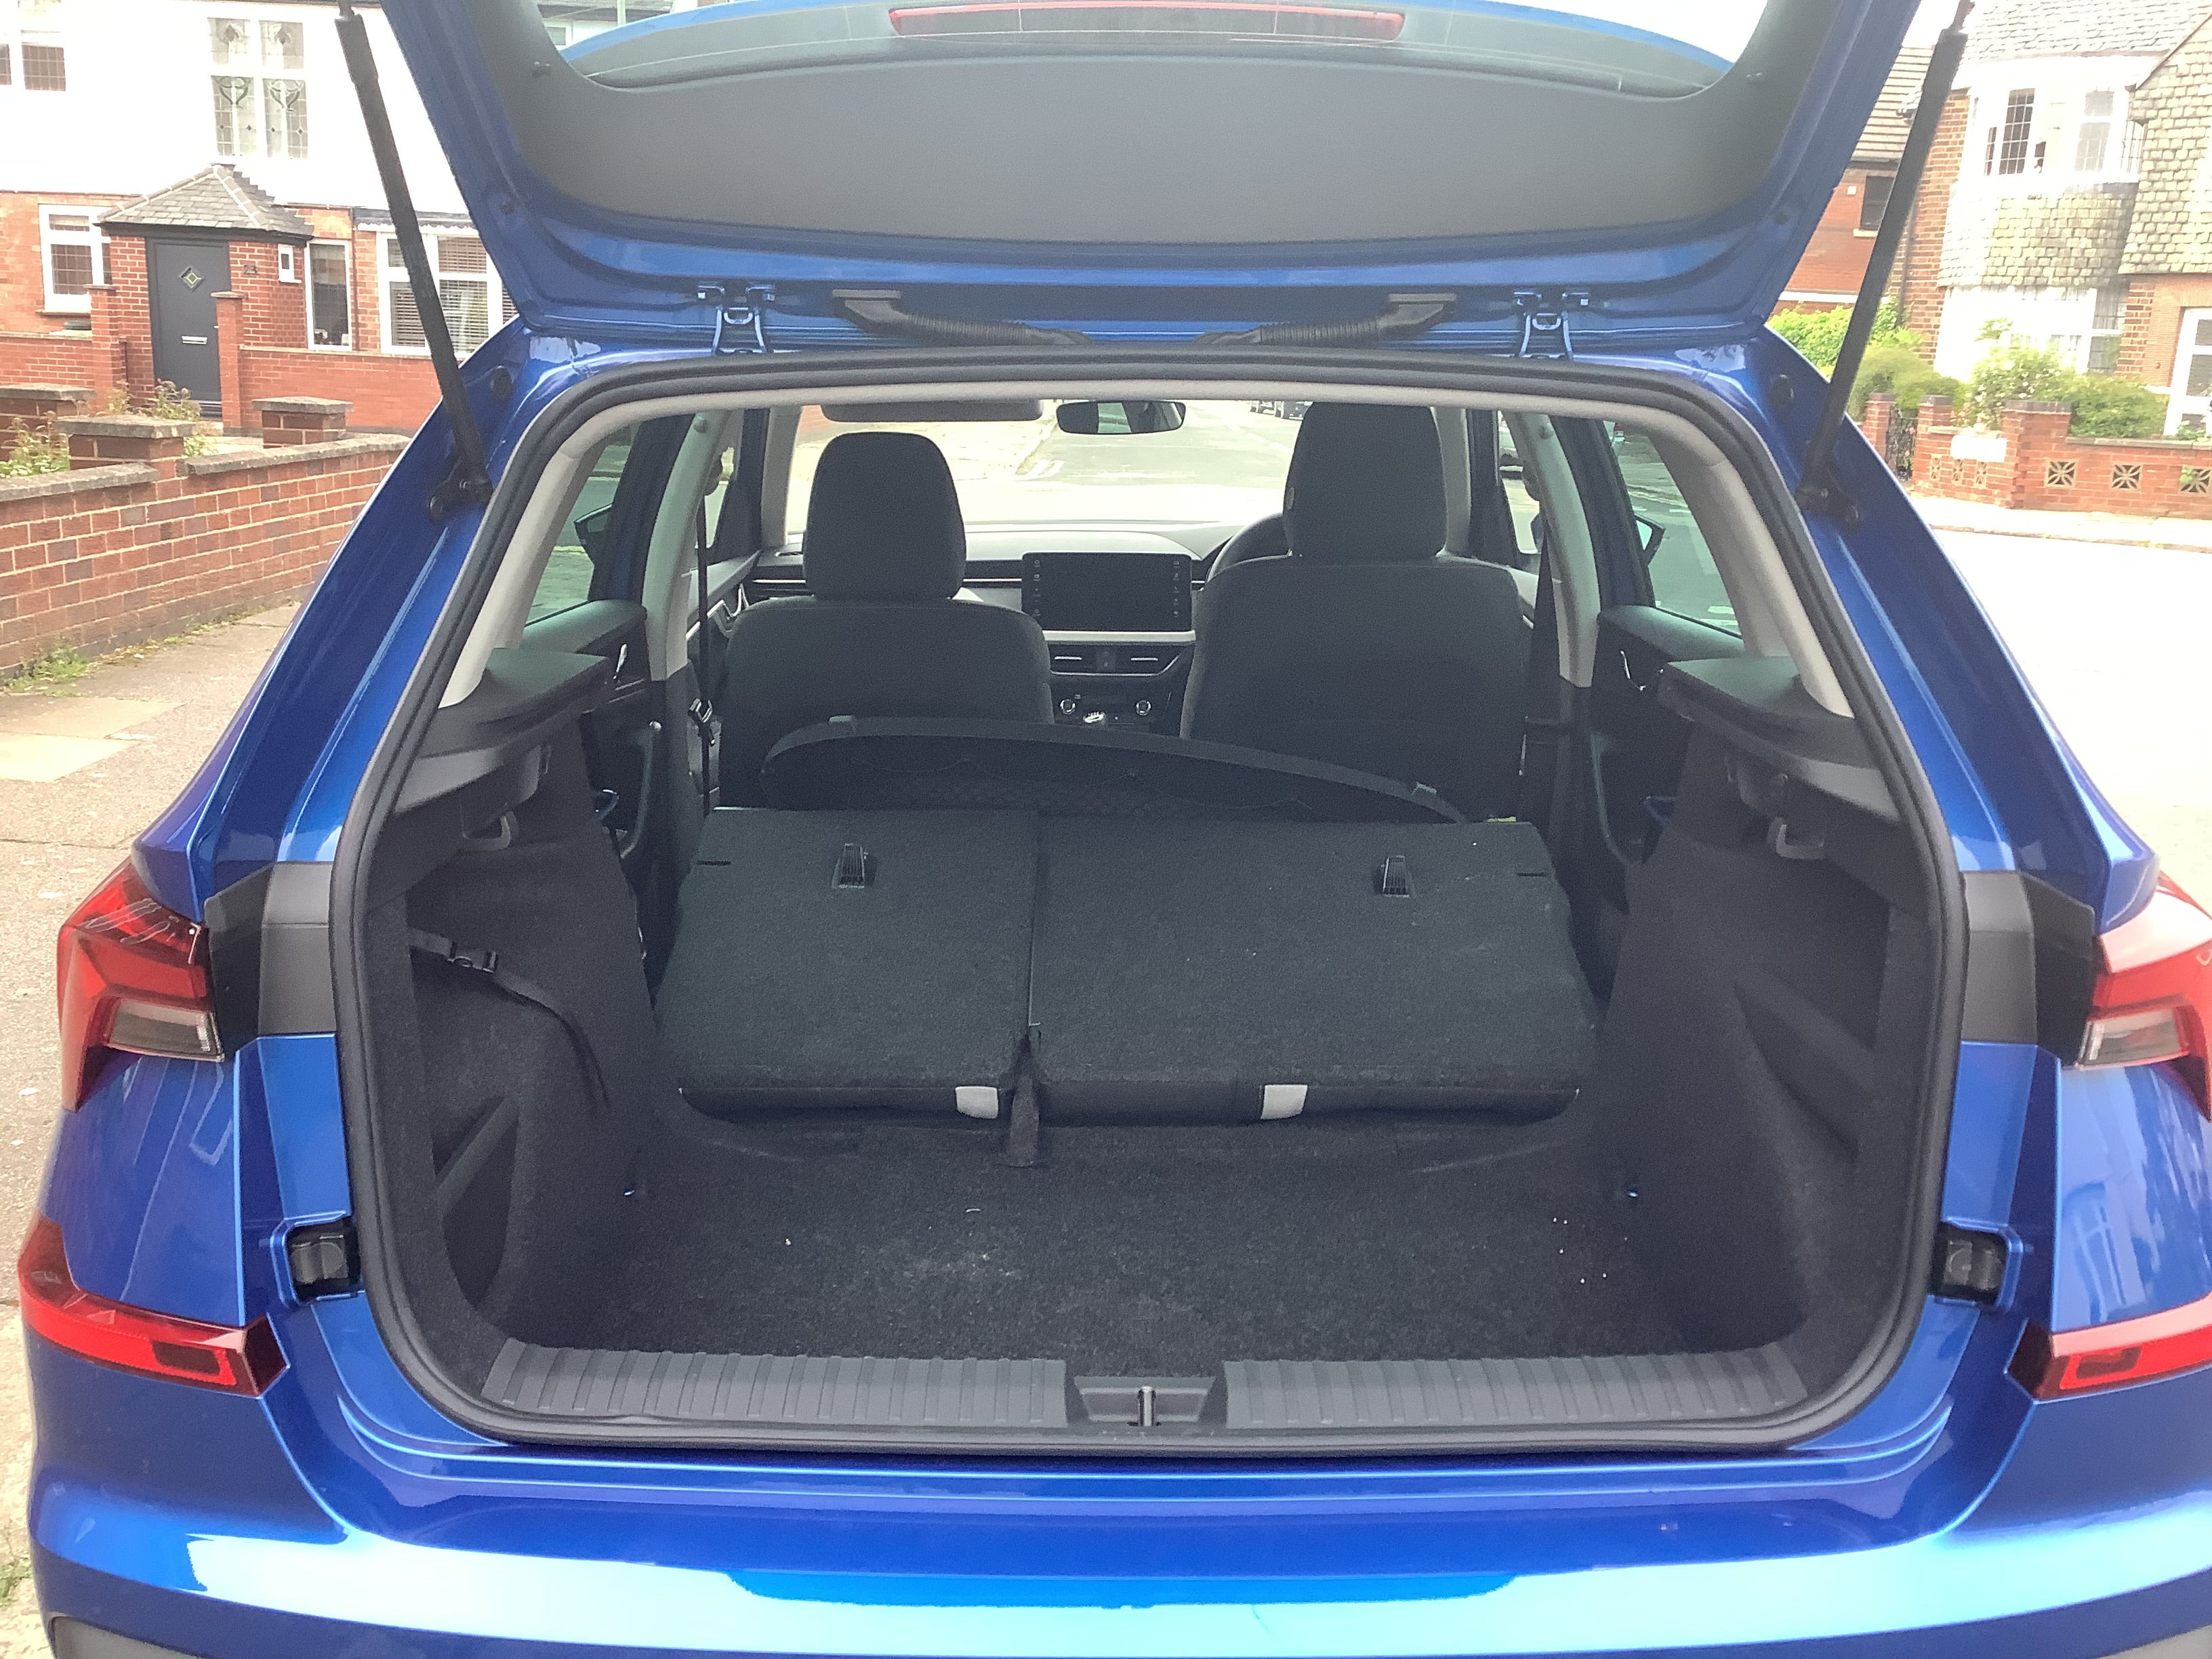 The Kamiq has a 400-litre boot with seats up and 1395-litre with them down